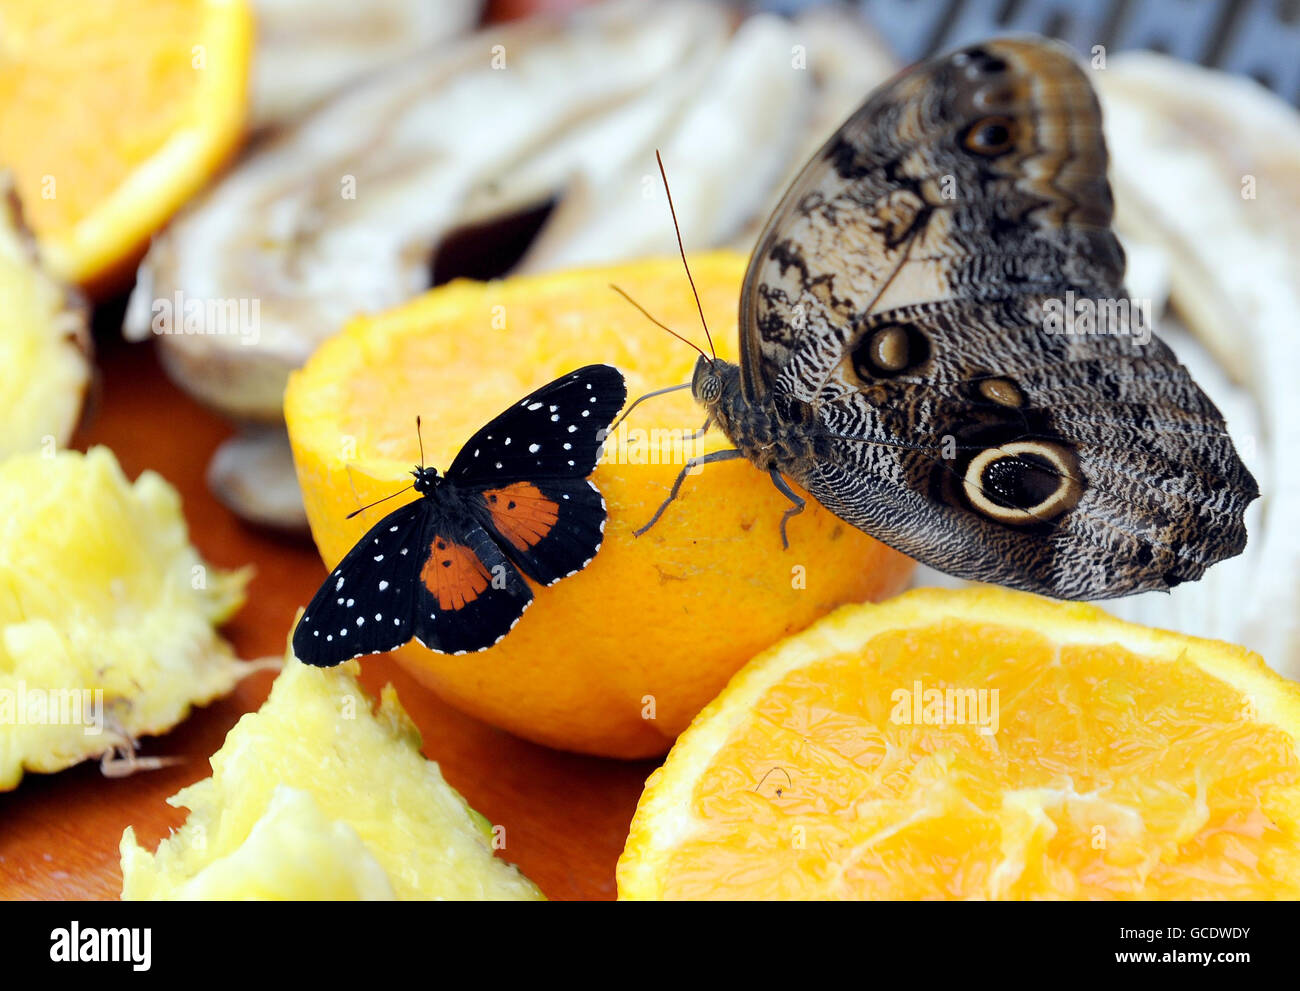 Butterfly Explorers exhibition. Butterflies feed on fruit at the Butterfly Explorers exhibition at the Natural History Museum, London. Stock Photo